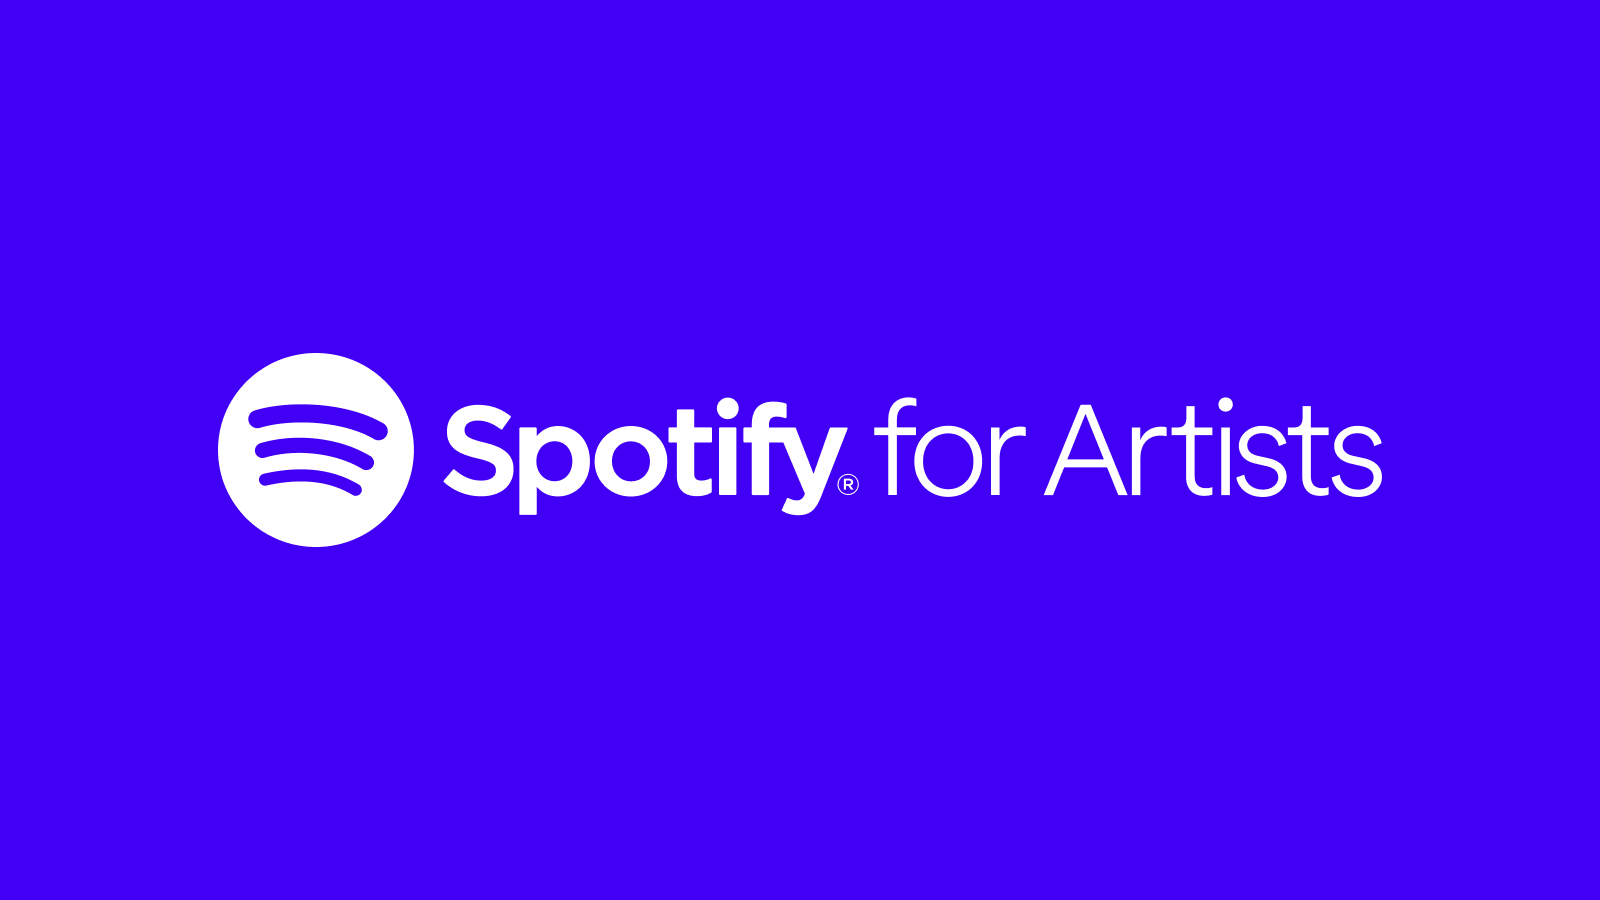 How to change top artists on spotify